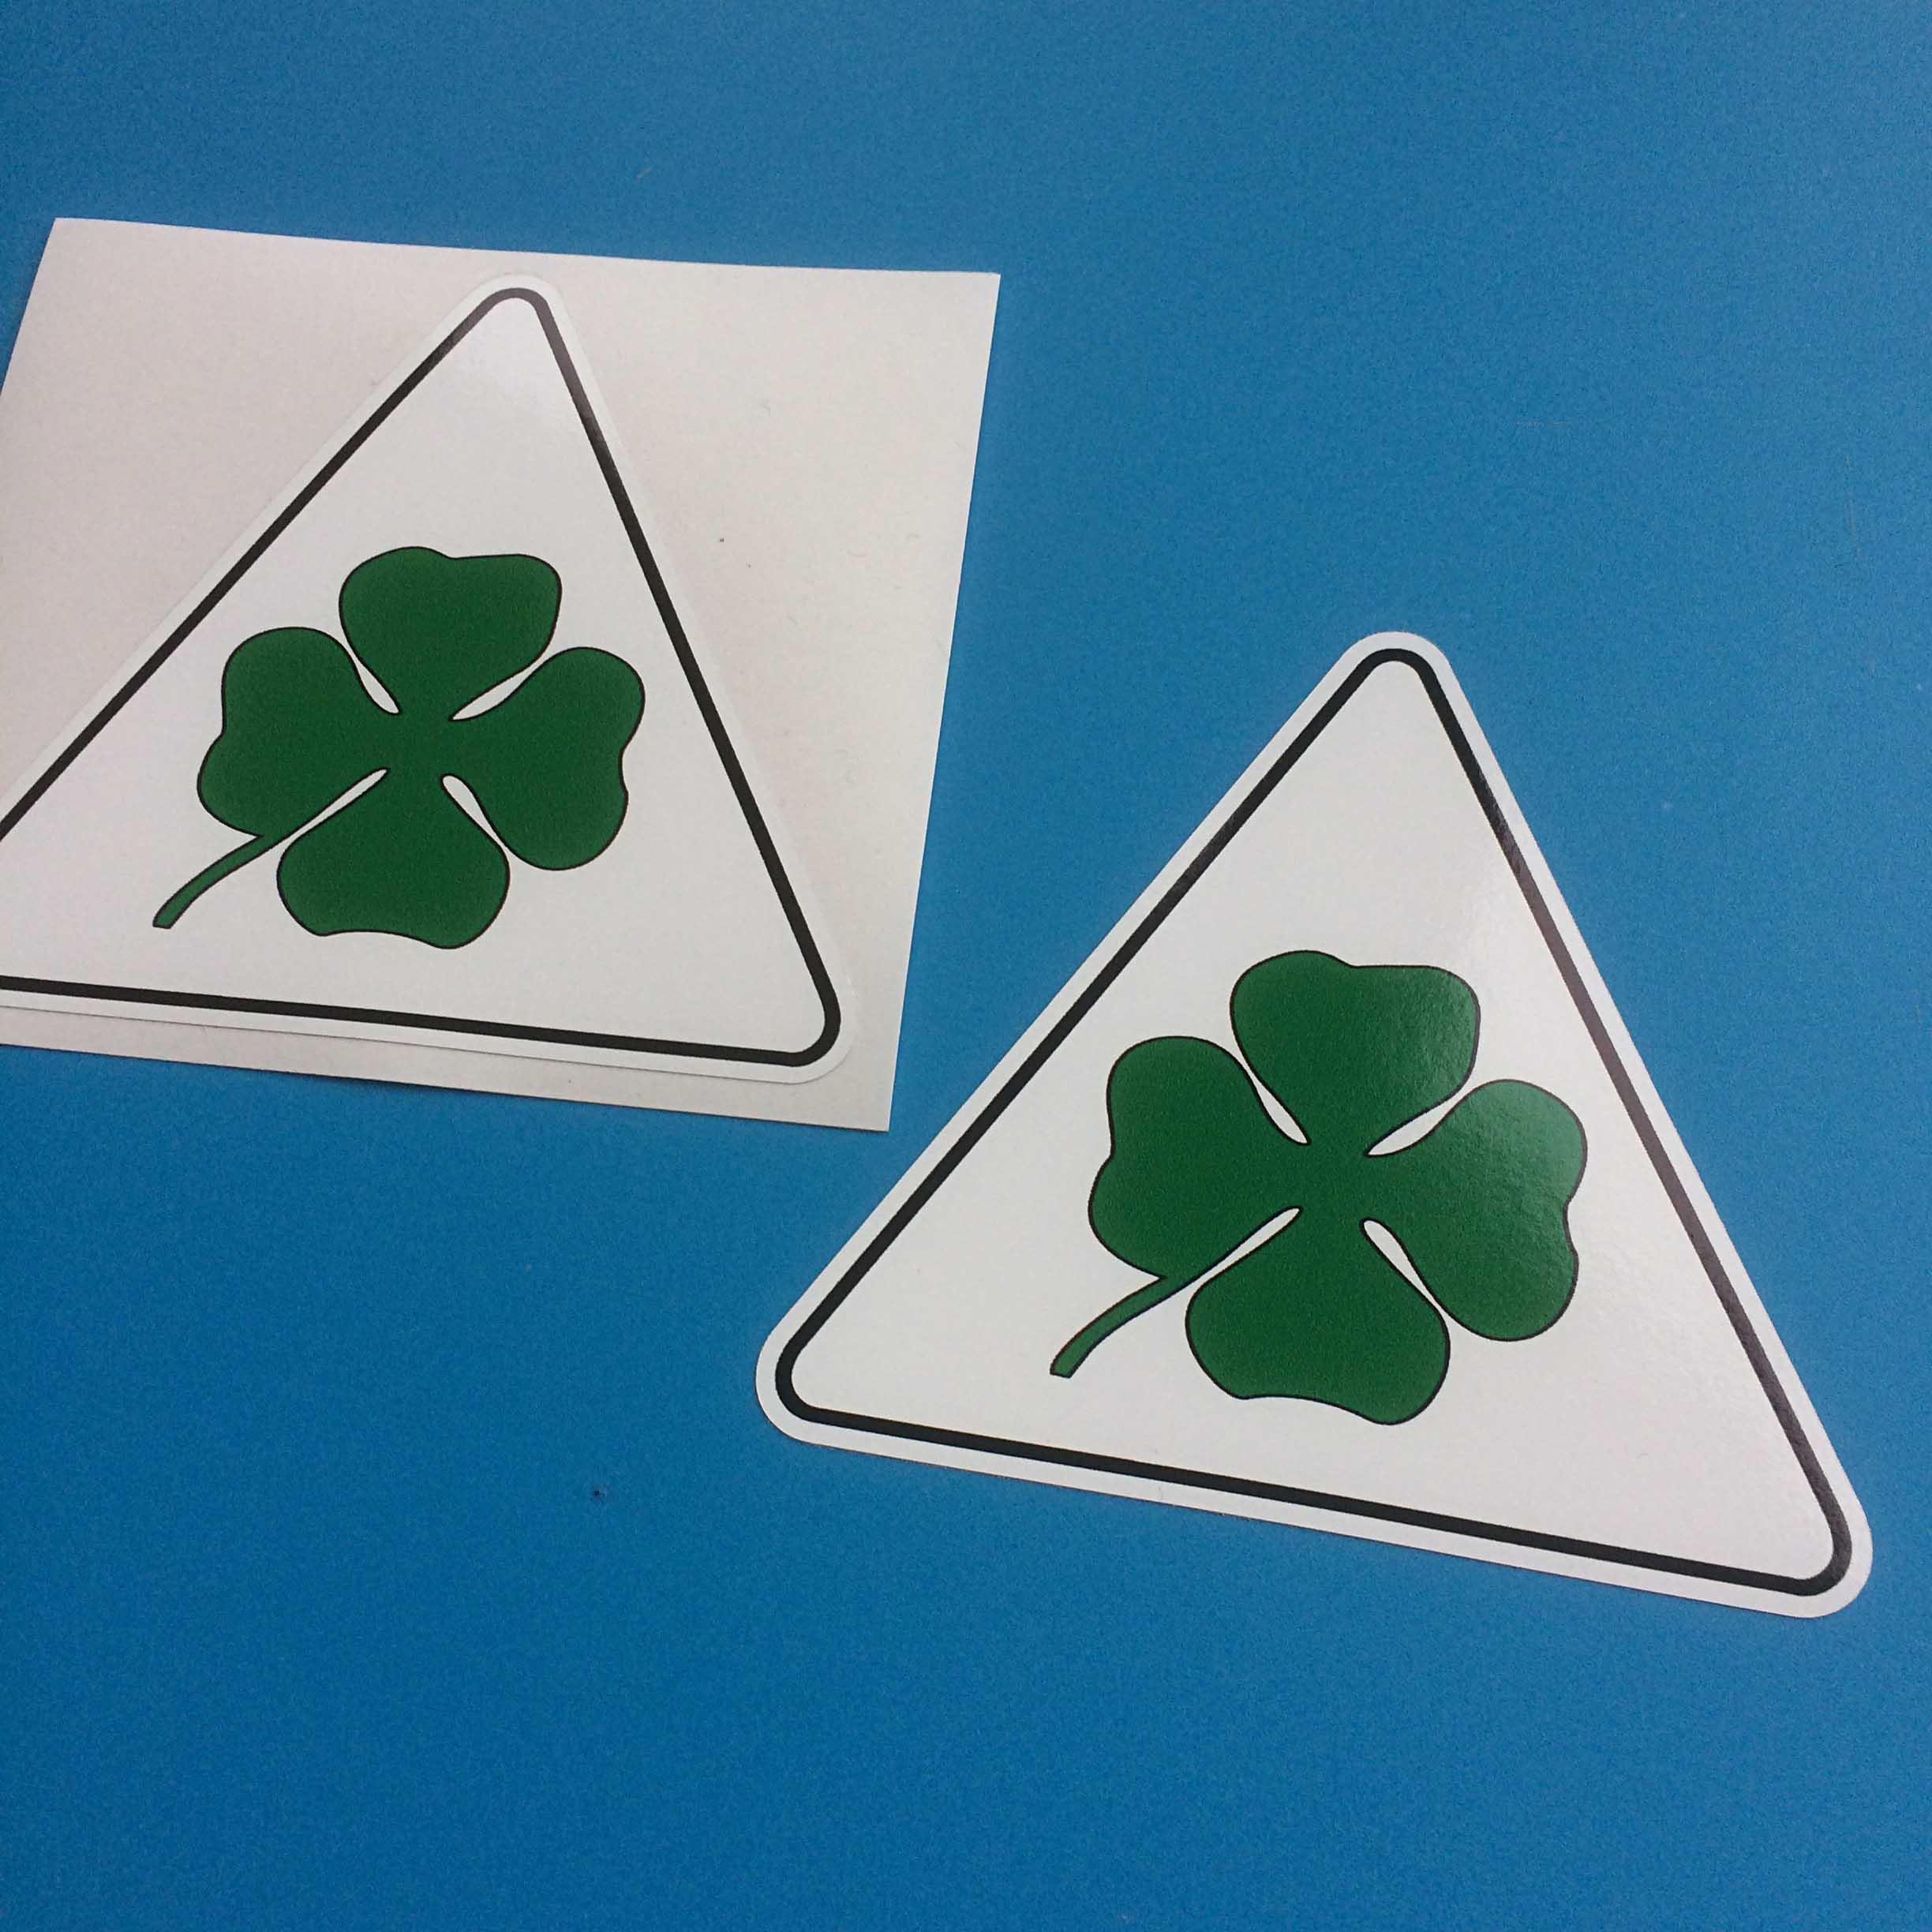 CLOVERLEAF STICKERS. A white triangular sticker with a black border. In the centre is a green four leaf clover.